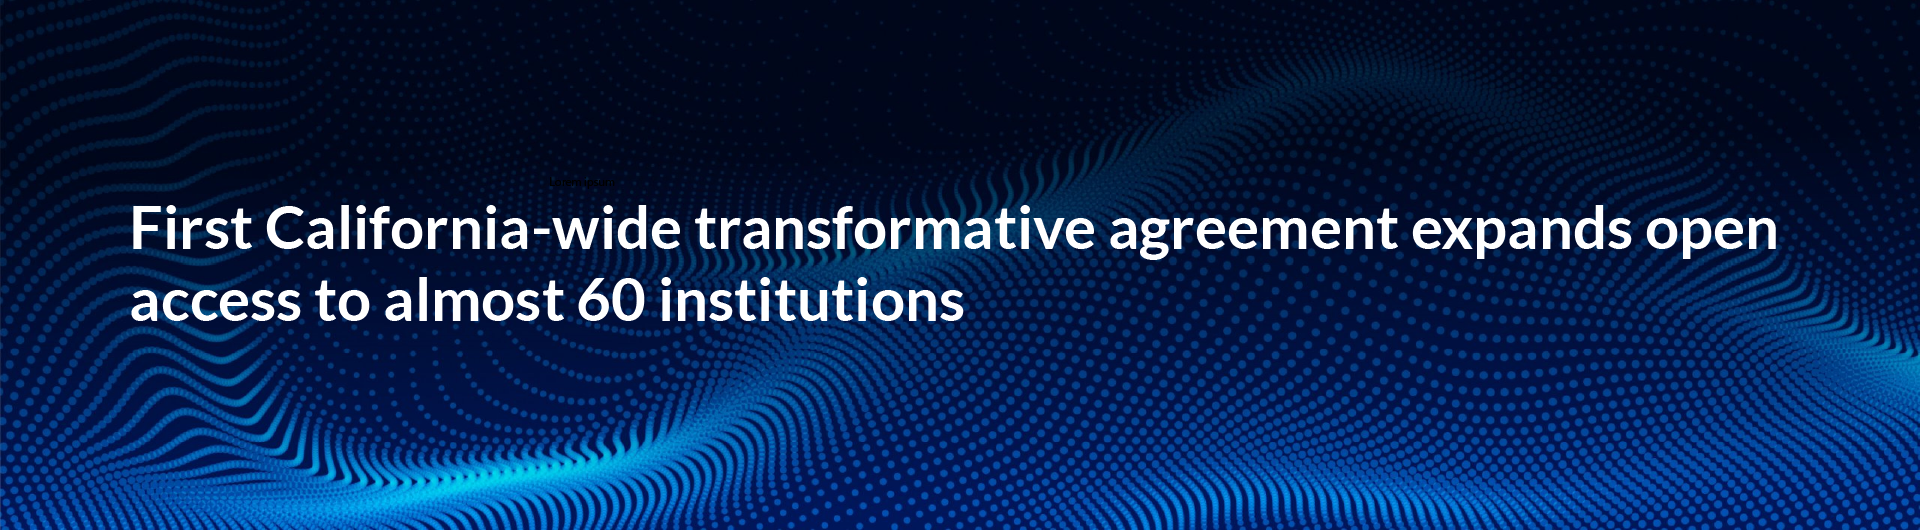 First California-wide transformative agreement expands open access to almost 60 institutions